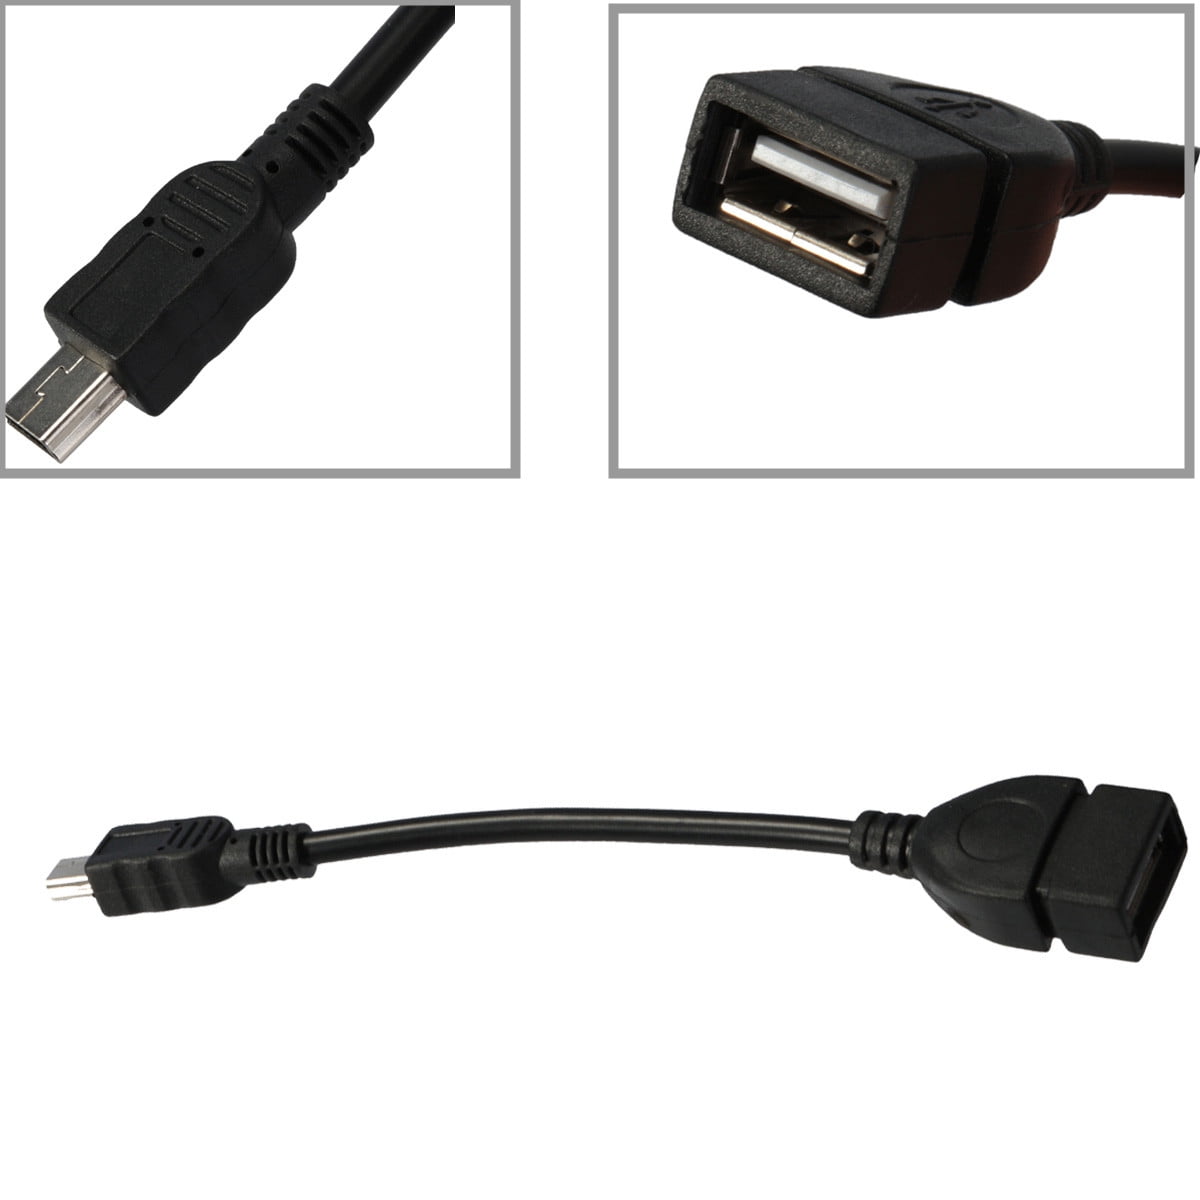 Mini USB 5pin Male to USB 2.0 Type A Female Jack OTG Host Adapter Short Cable*-* 